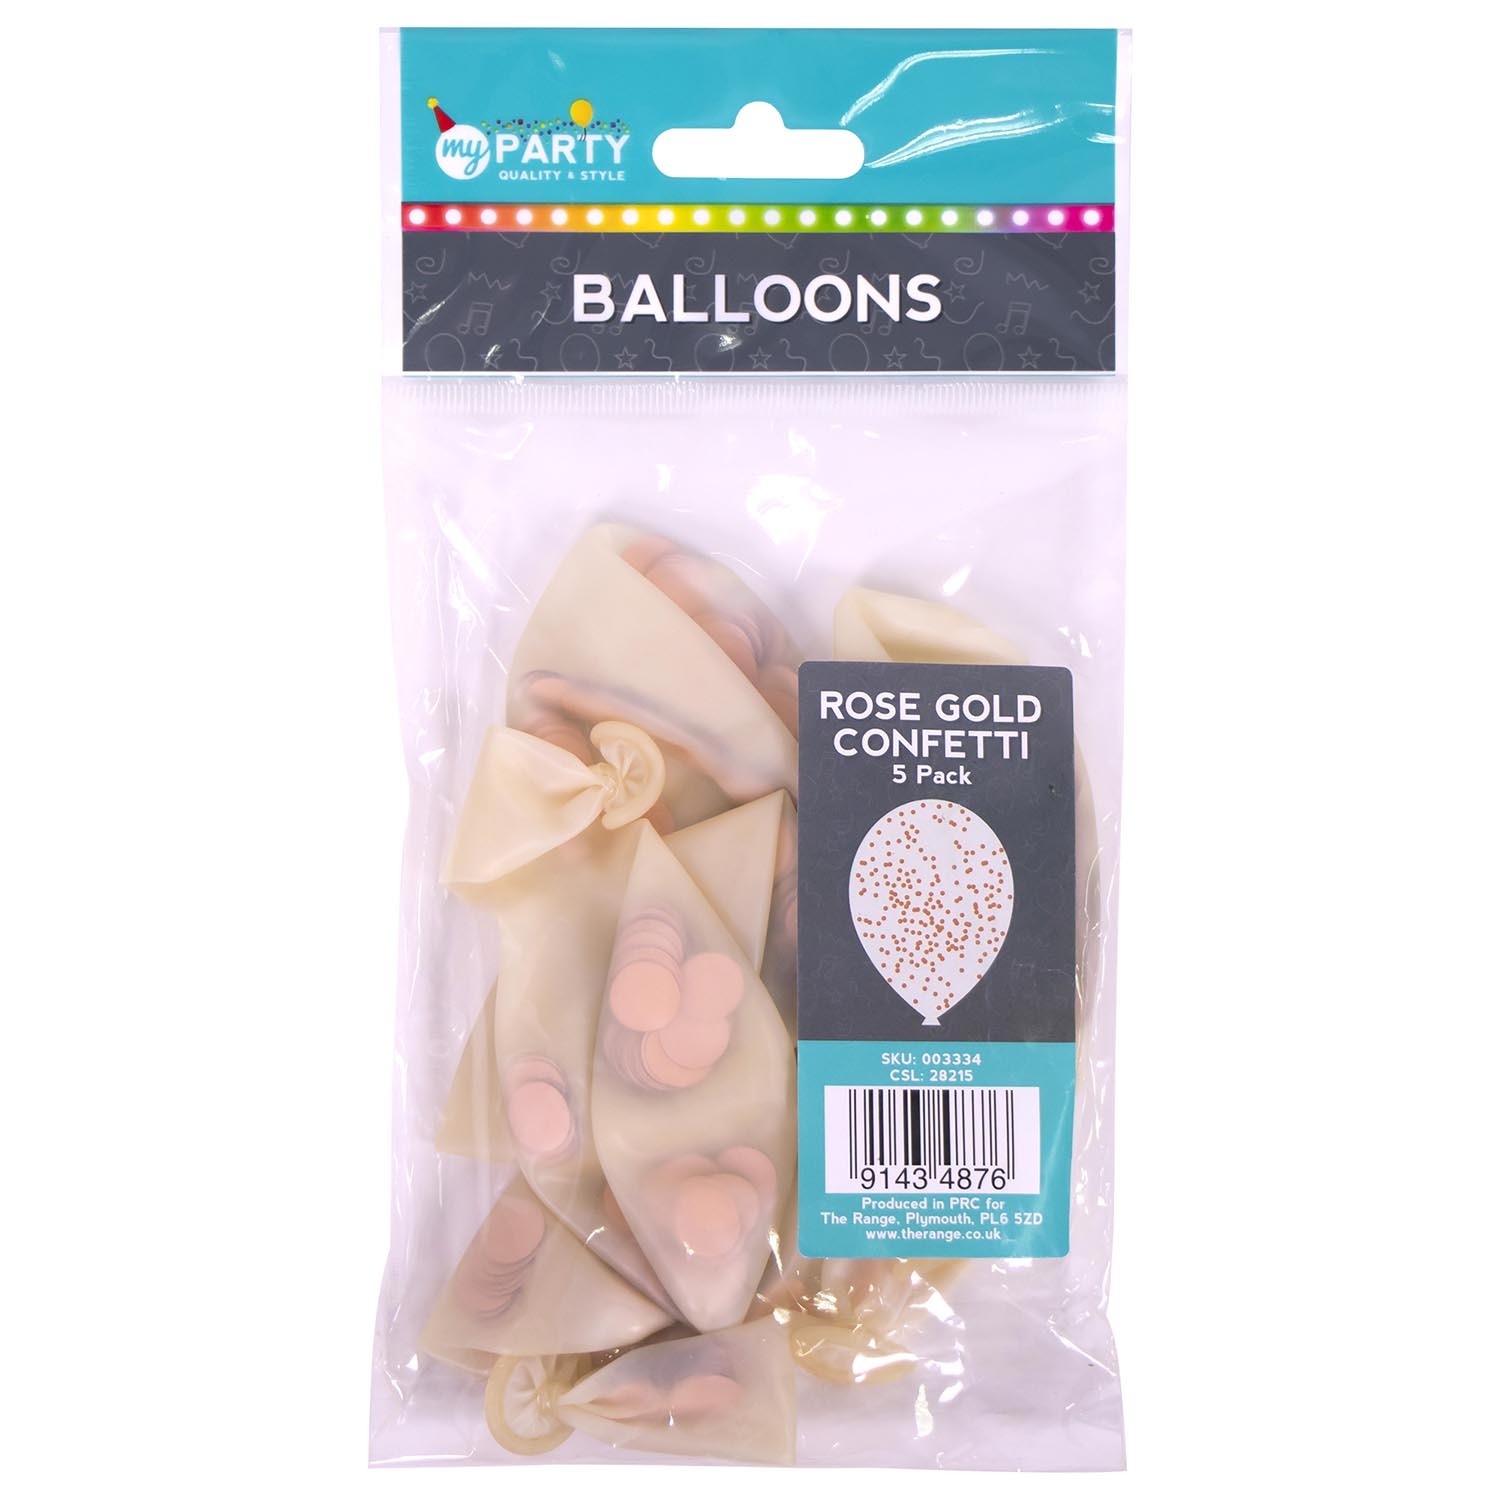 Pack of Five Confetti Filled Balloons - Rose Gold Image